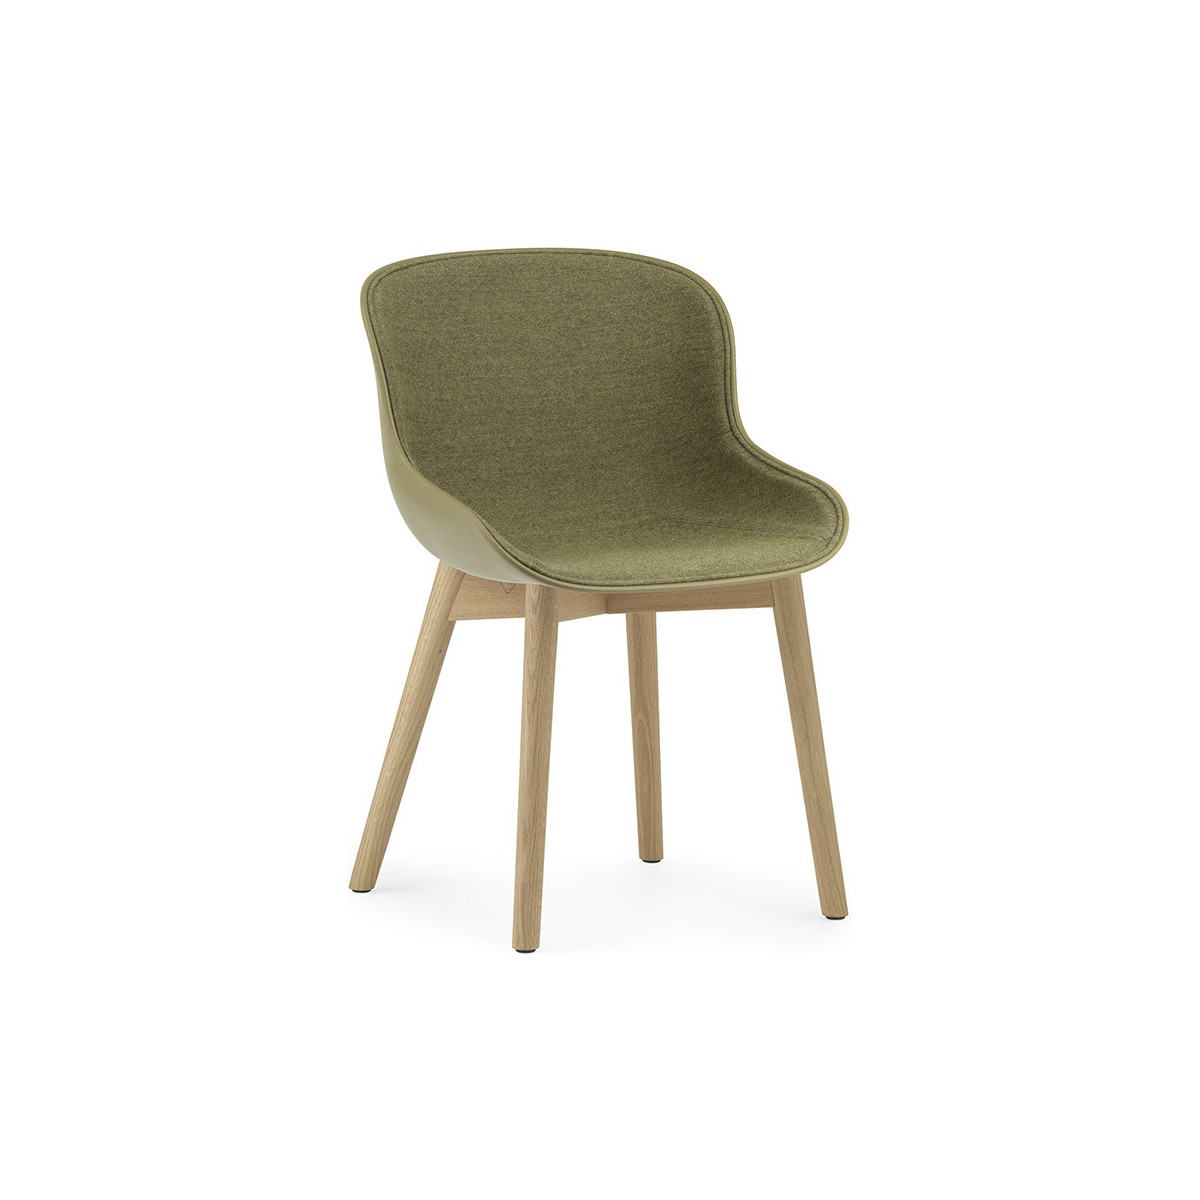 olive / Synergy 48 / oak – front upholstered –  Hyg Chair